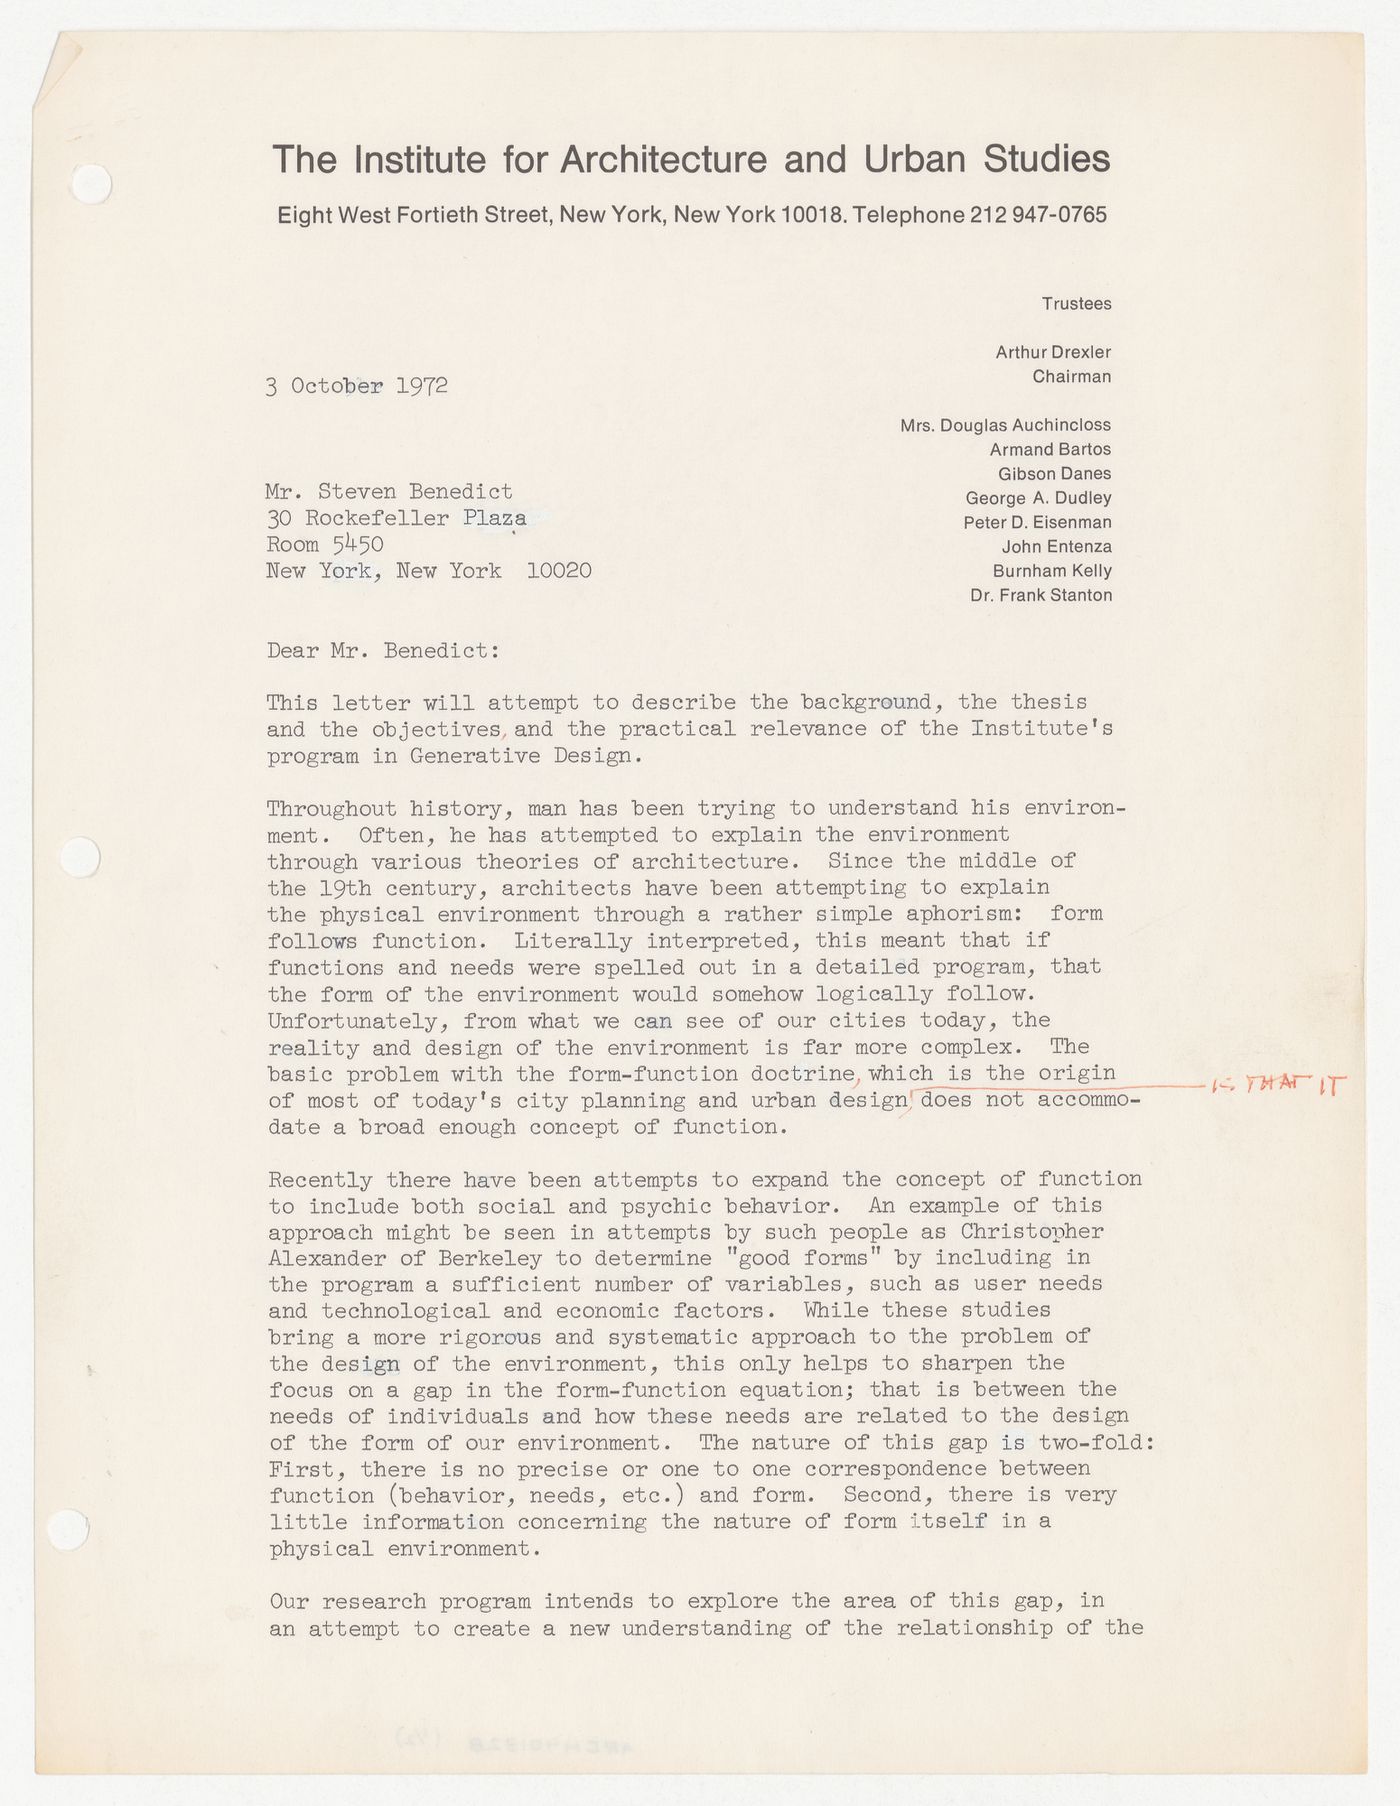 Letter from Peter D. Eisenman to Steven Benedict about the Program in Generative Design